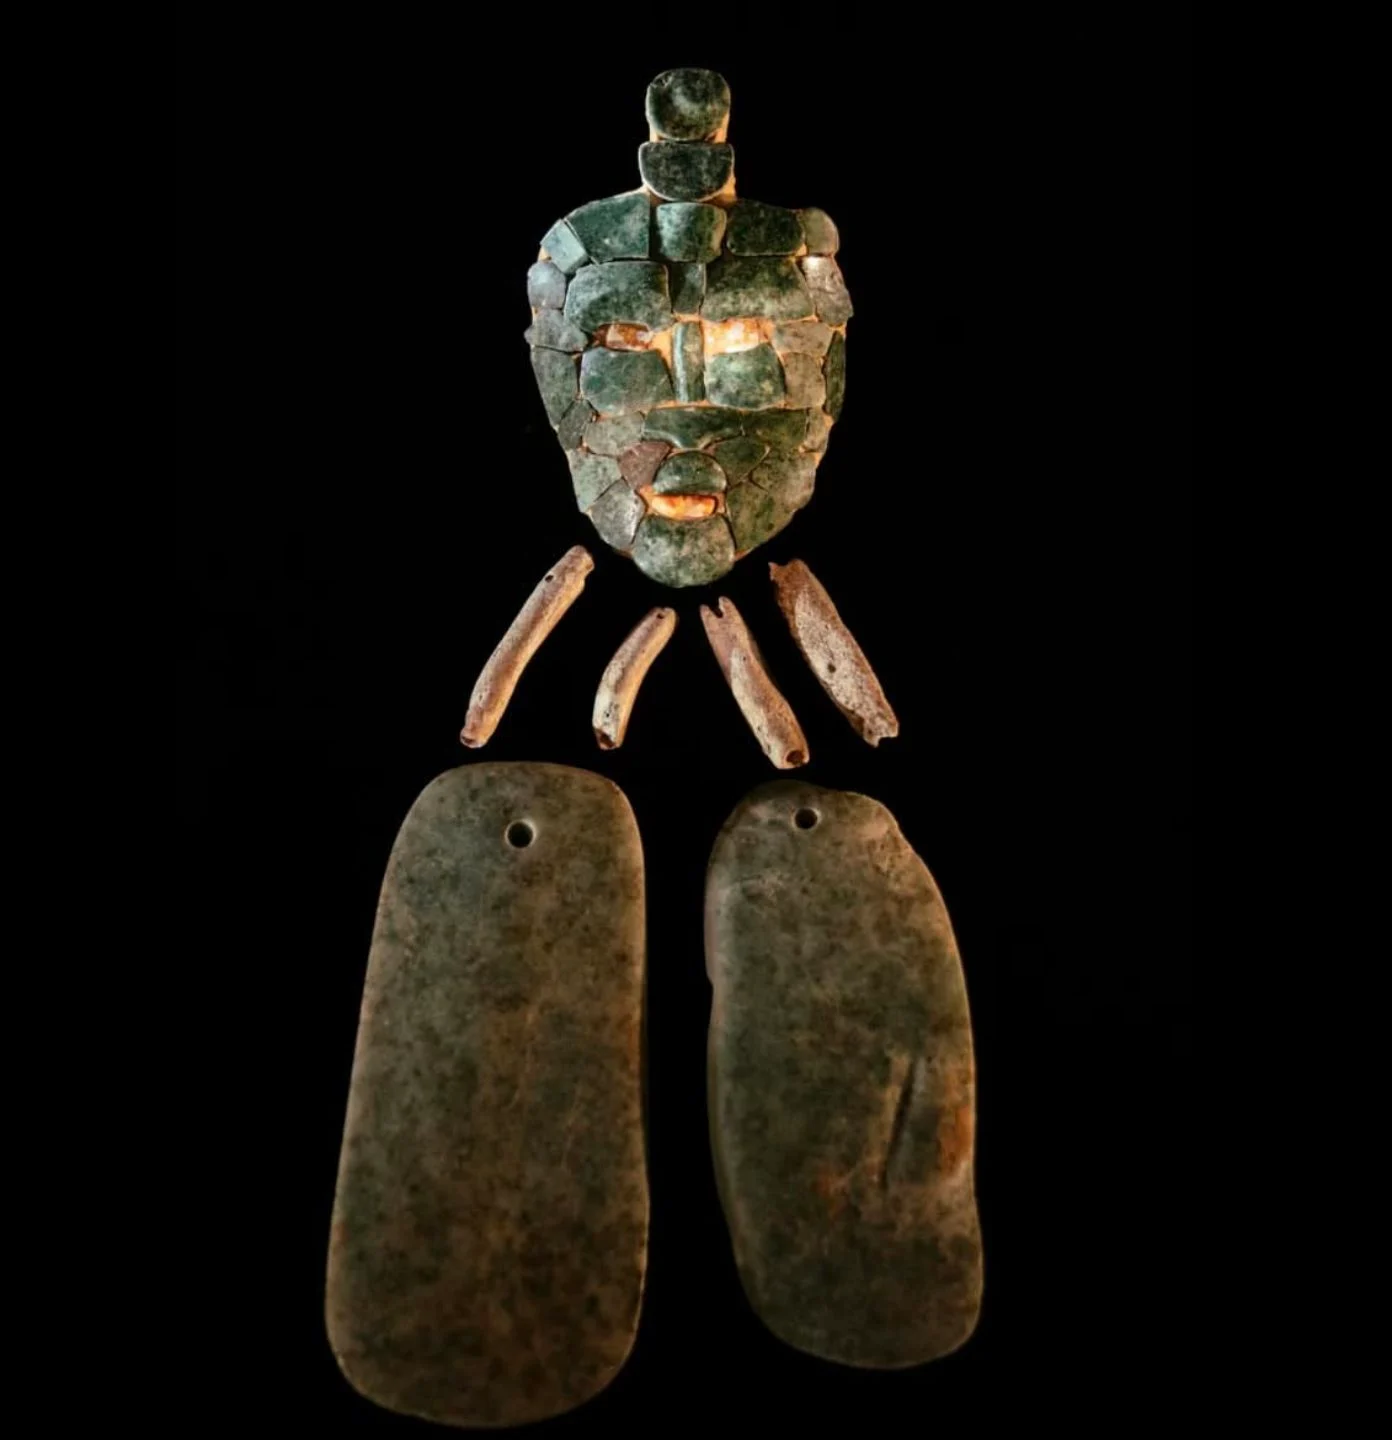 Undisturbed tomb of an unknown Maya king with jade mask discovered in Guatemala 4